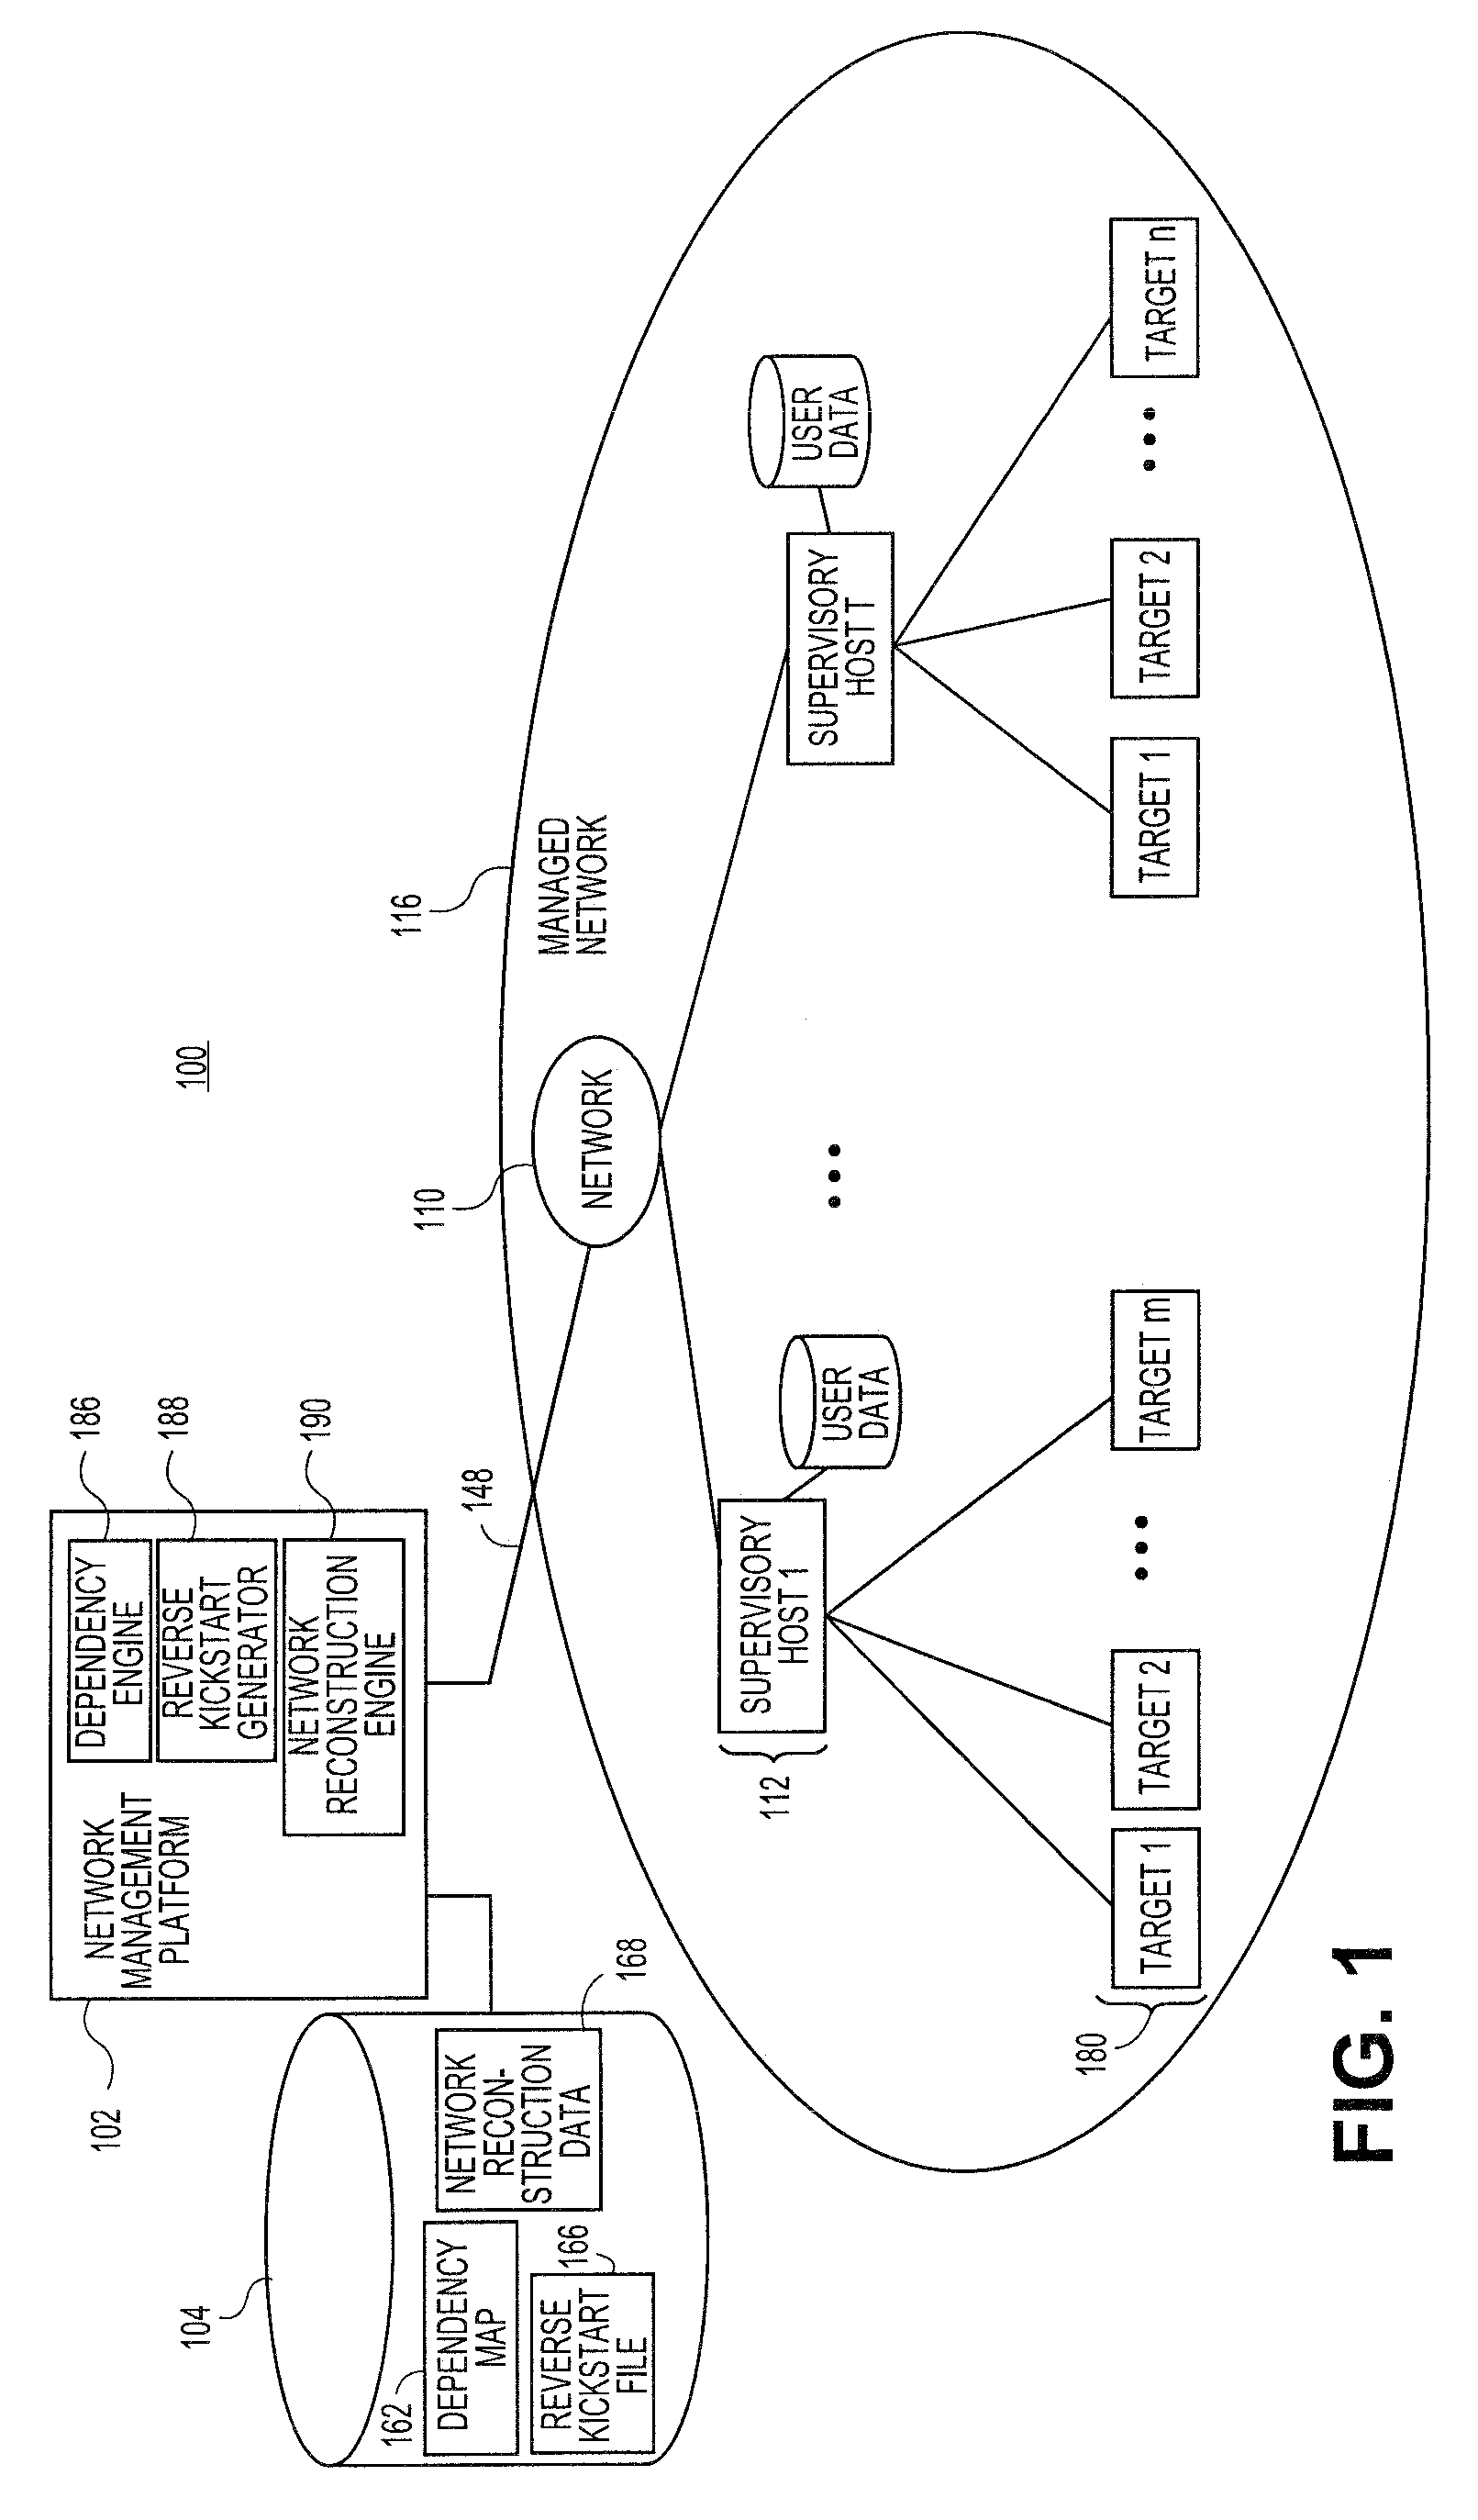 Systems and methods for automatic discovery of network software relationships